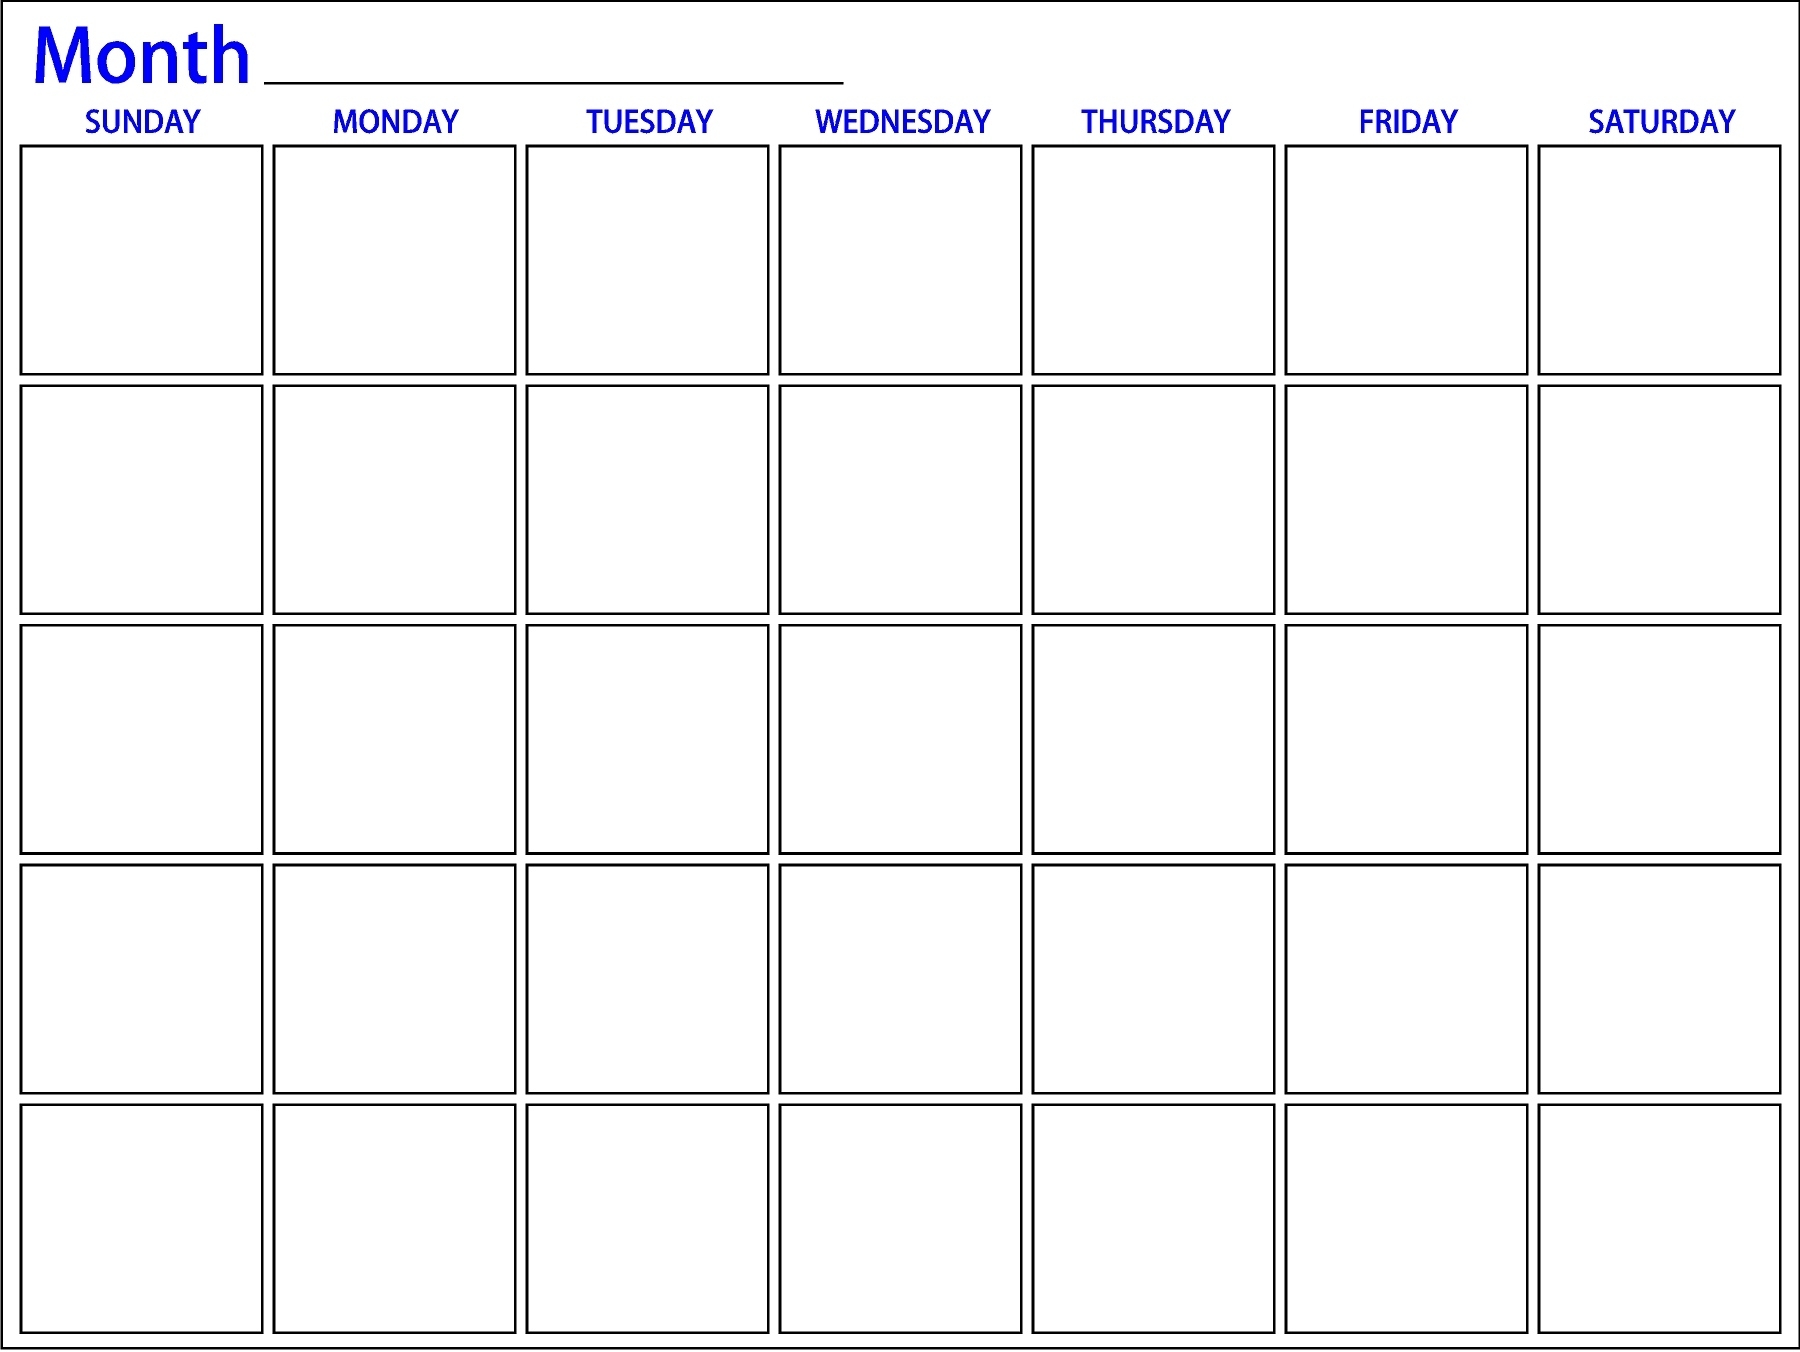 One Month Notes | Whiteboard Calendar | Dry Erase Innovations Monthly Calendar Dry Erase Printable